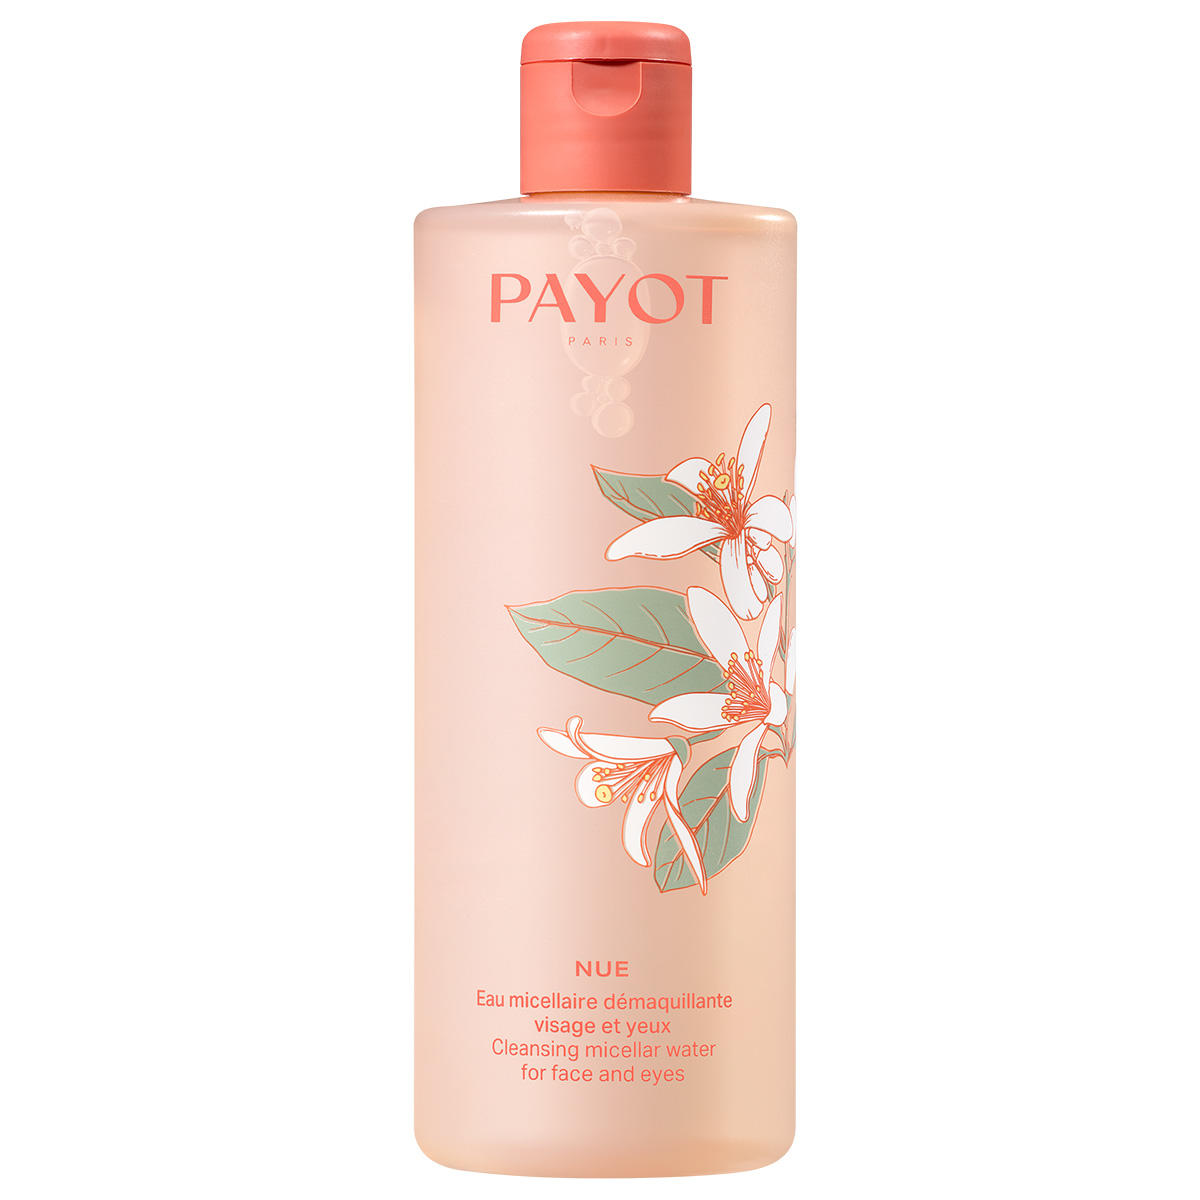 Payot Nue Eau Micellaire Démaquillante - Limited Edtion 400 ml - 1